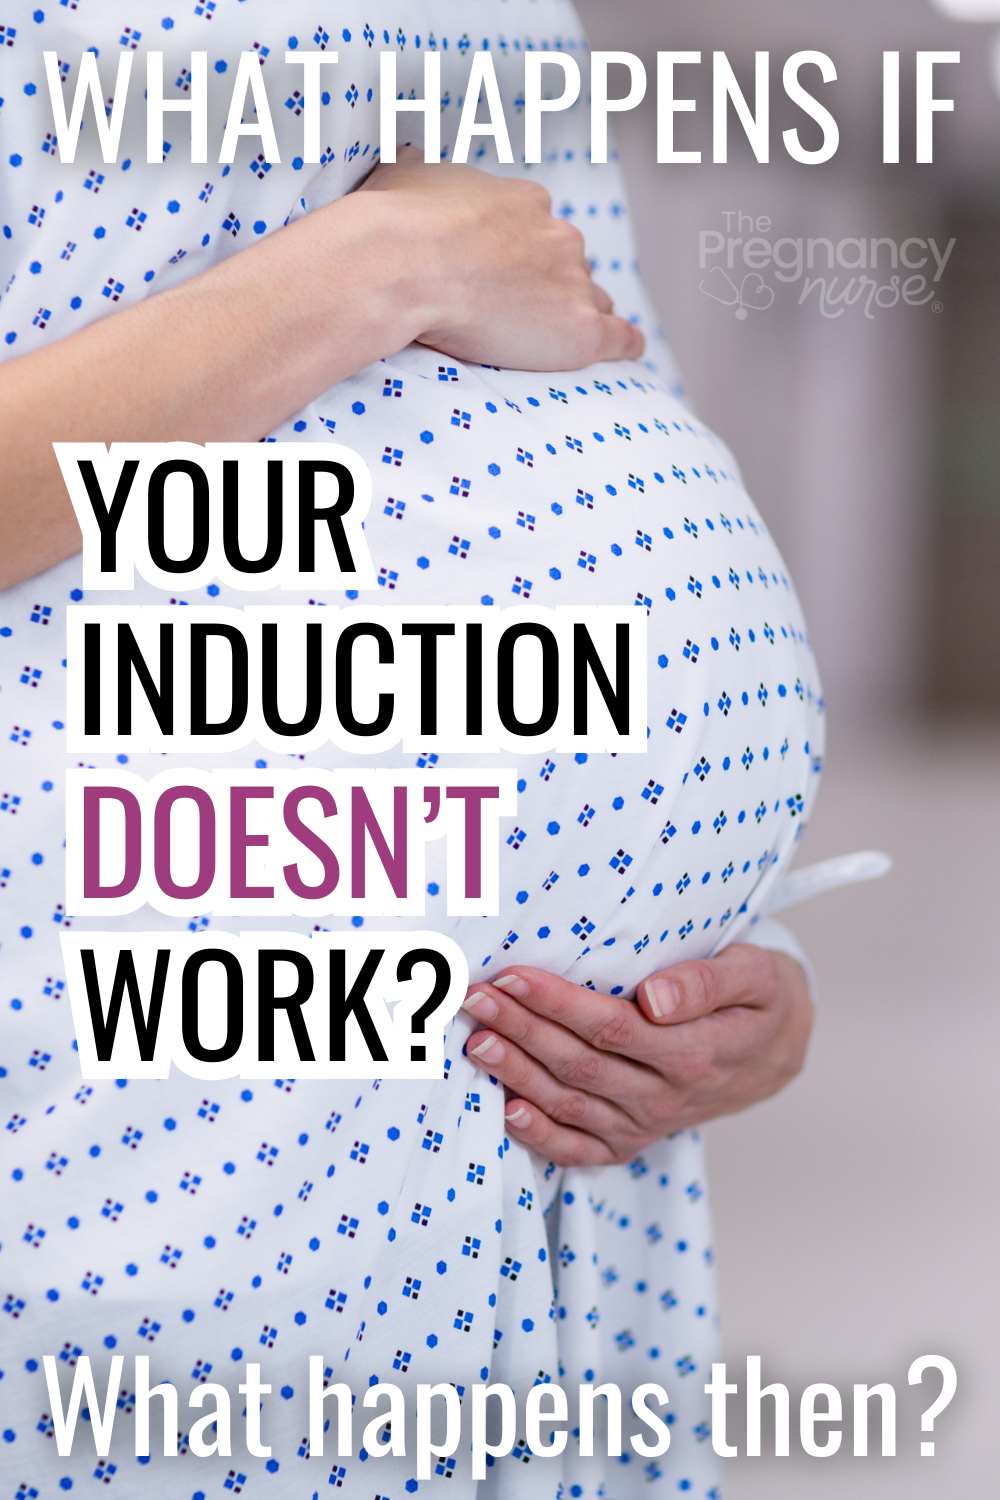 What happens when your induction fails? It's a question many expecting mothers face but are too afraid to ask. Let's walk through the three potential paths your induction might take. Spoiler alert: One of them may surprise you!